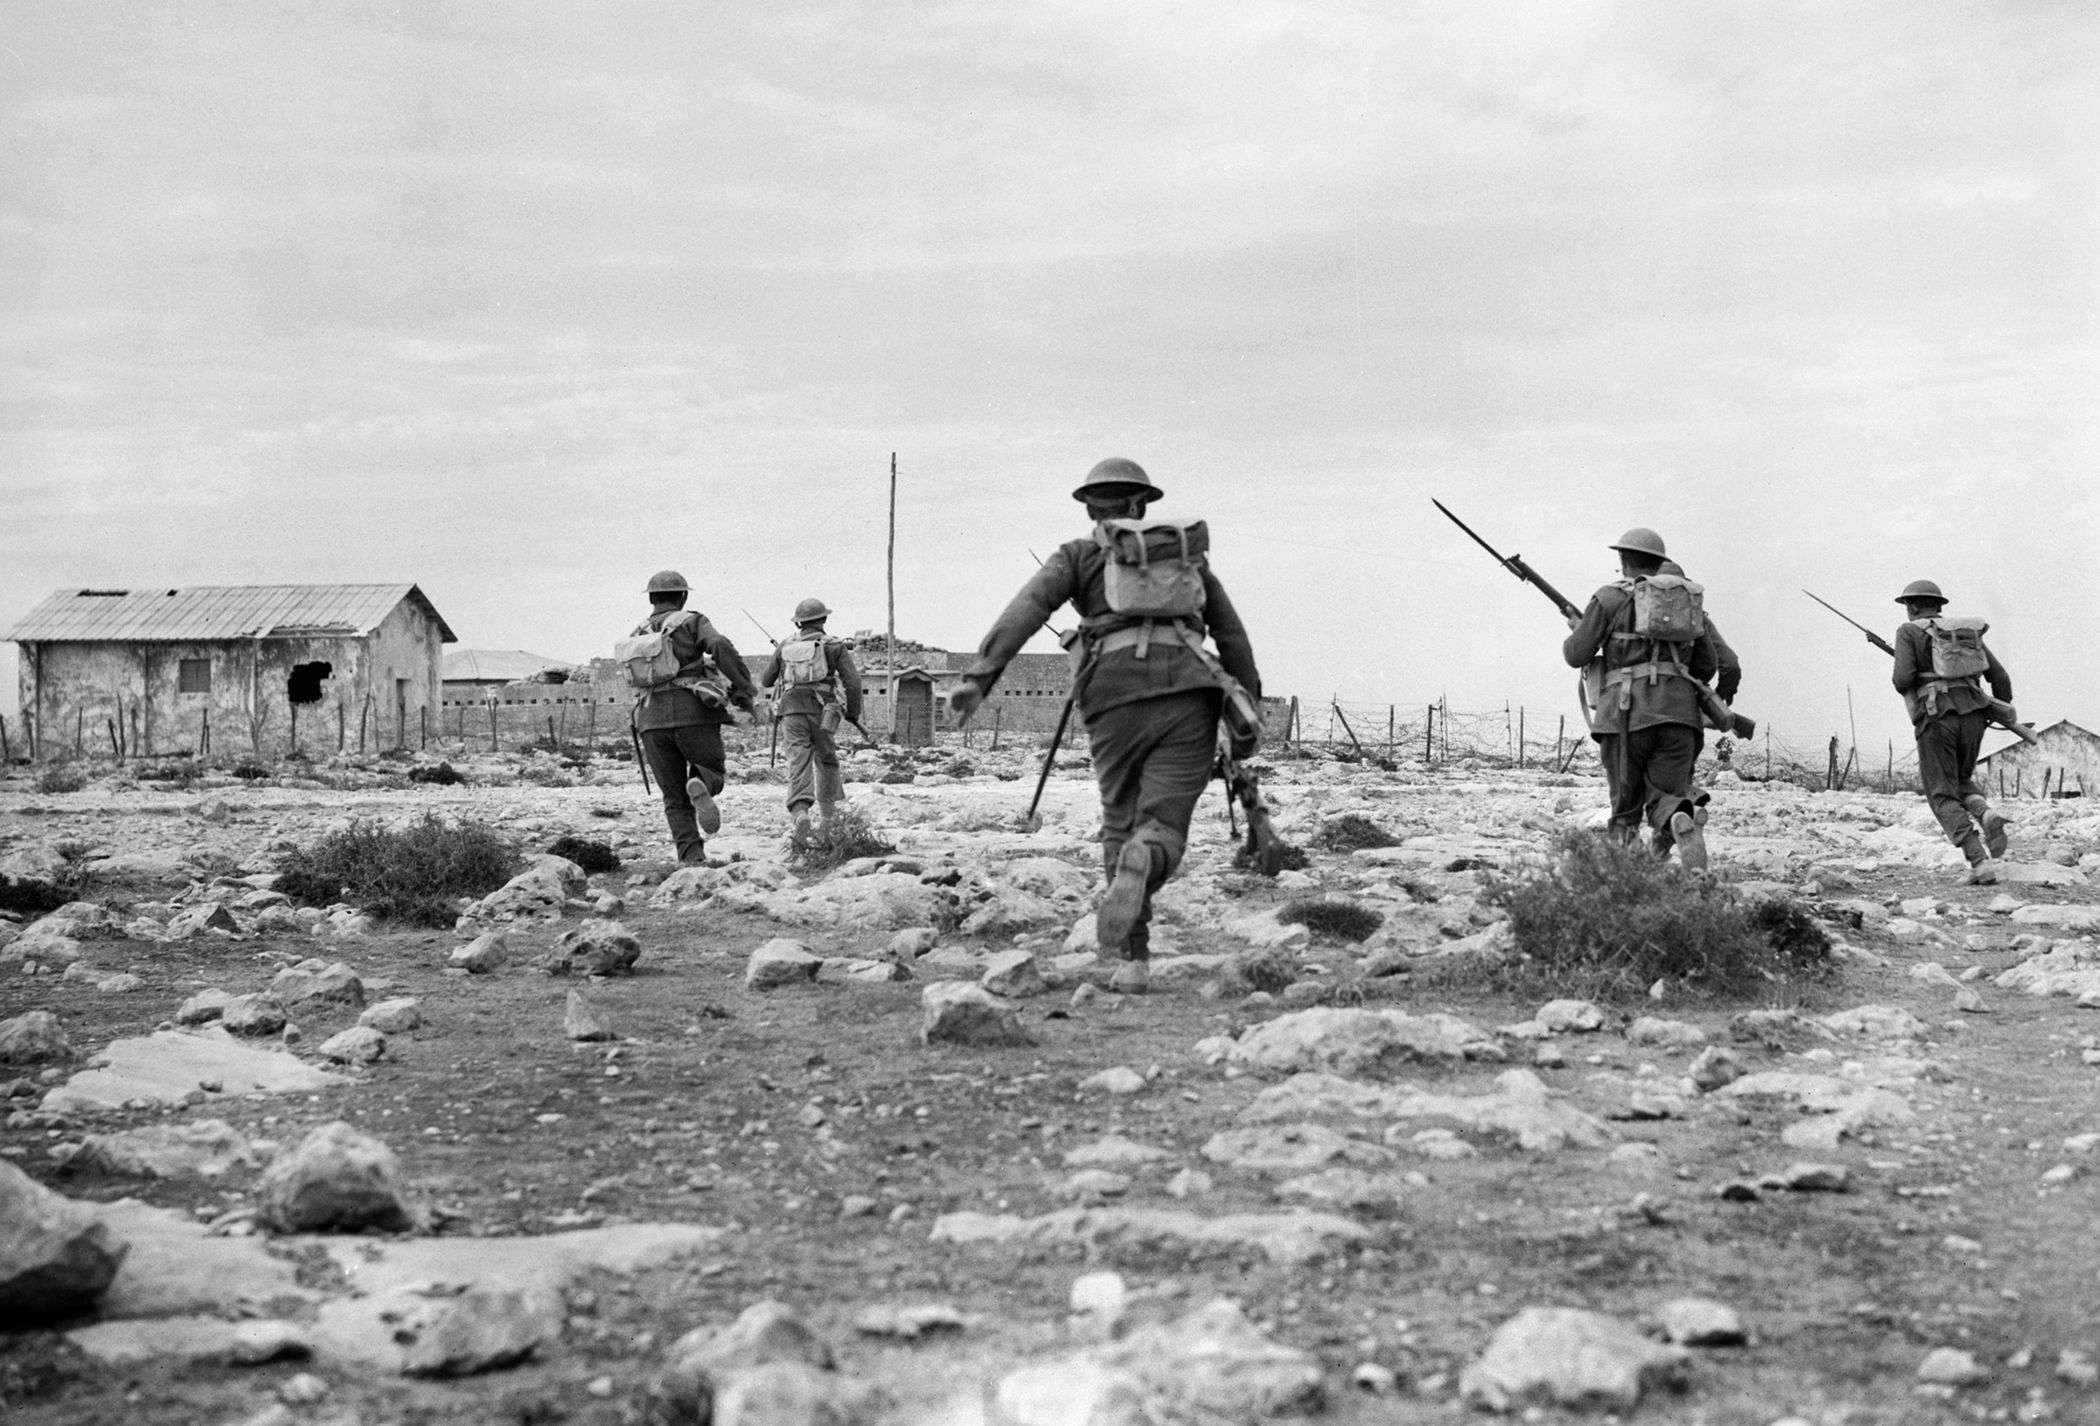 British soldiers advance rapidly toward barbed-wire entanglements in front of Italian fortifications at Derna on February 1, 1941. One of the British solders appears to be carrying a Bren gun, the standard issue infantry support machine gun of World War II.